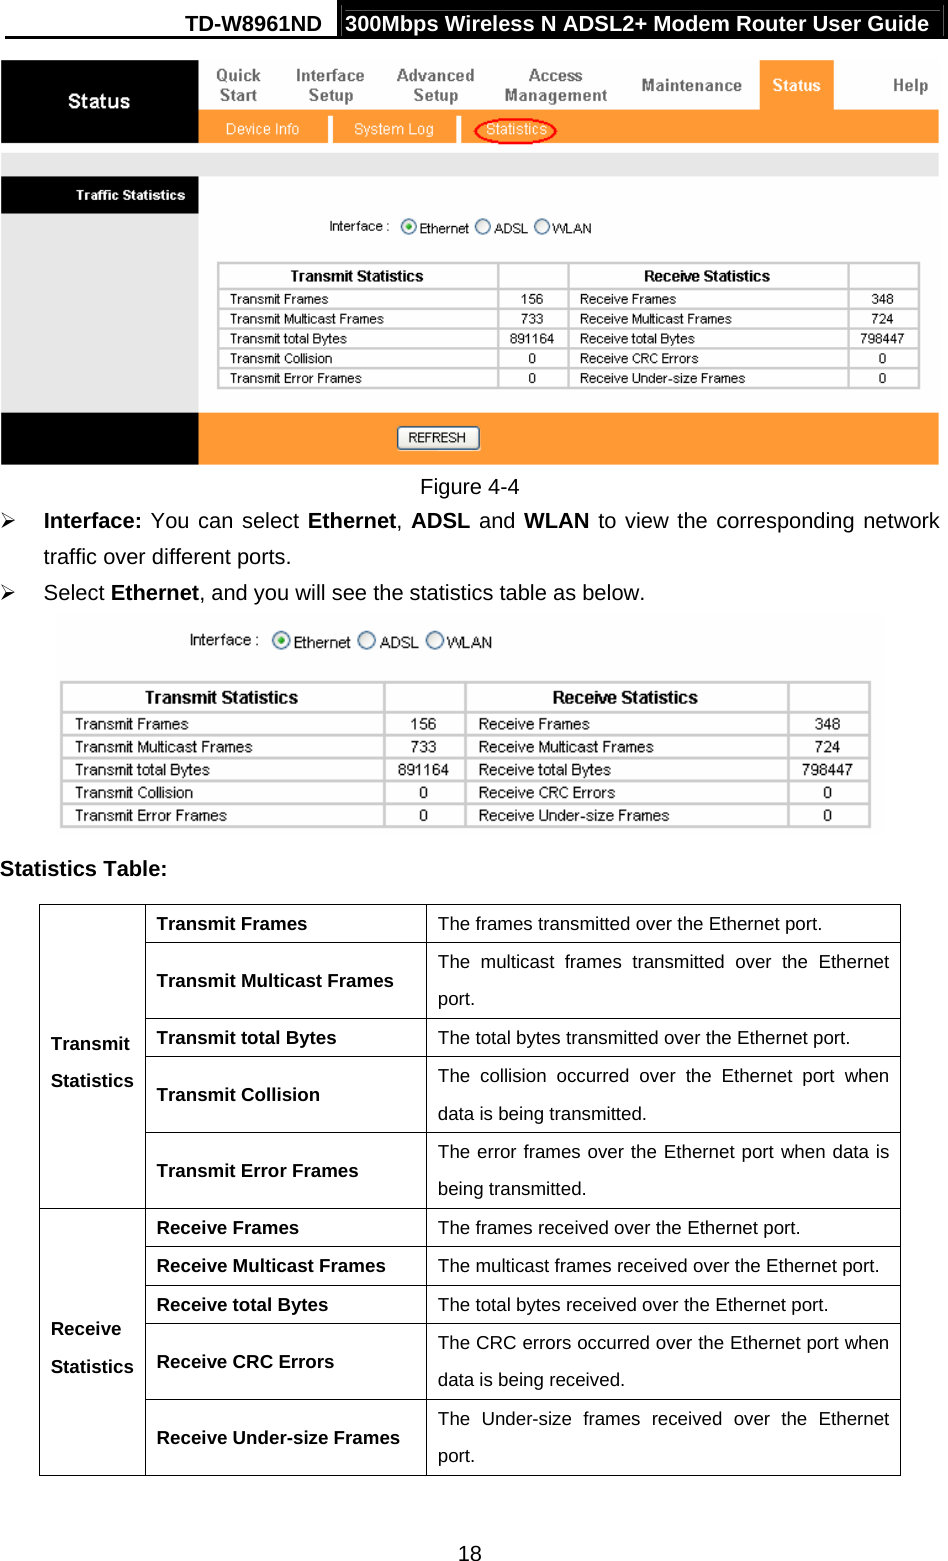 TD-W8961ND  300Mbps Wireless N ADSL2+ Modem Router User Guide  18 Figure 4-4 ¾ Interface: You can select Ethernet, ADSL and WLAN to view the corresponding network traffic over different ports.   ¾ Select Ethernet, and you will see the statistics table as below.  Statistics Table: Transmit Frames  The frames transmitted over the Ethernet port. Transmit Multicast Frames  The multicast frames transmitted over the Ethernet port. Transmit total Bytes  The total bytes transmitted over the Ethernet port. Transmit Collision  The collision occurred over the Ethernet port when data is being transmitted. Transmit Statistics Transmit Error Frames  The error frames over the Ethernet port when data is being transmitted.   Receive Frames  The frames received over the Ethernet port. Receive Multicast Frames  The multicast frames received over the Ethernet port. Receive total Bytes  The total bytes received over the Ethernet port. Receive CRC Errors  The CRC errors occurred over the Ethernet port when data is being received. Receive Statistics Receive Under-size Frames  The Under-size frames received over the Ethernet port.  